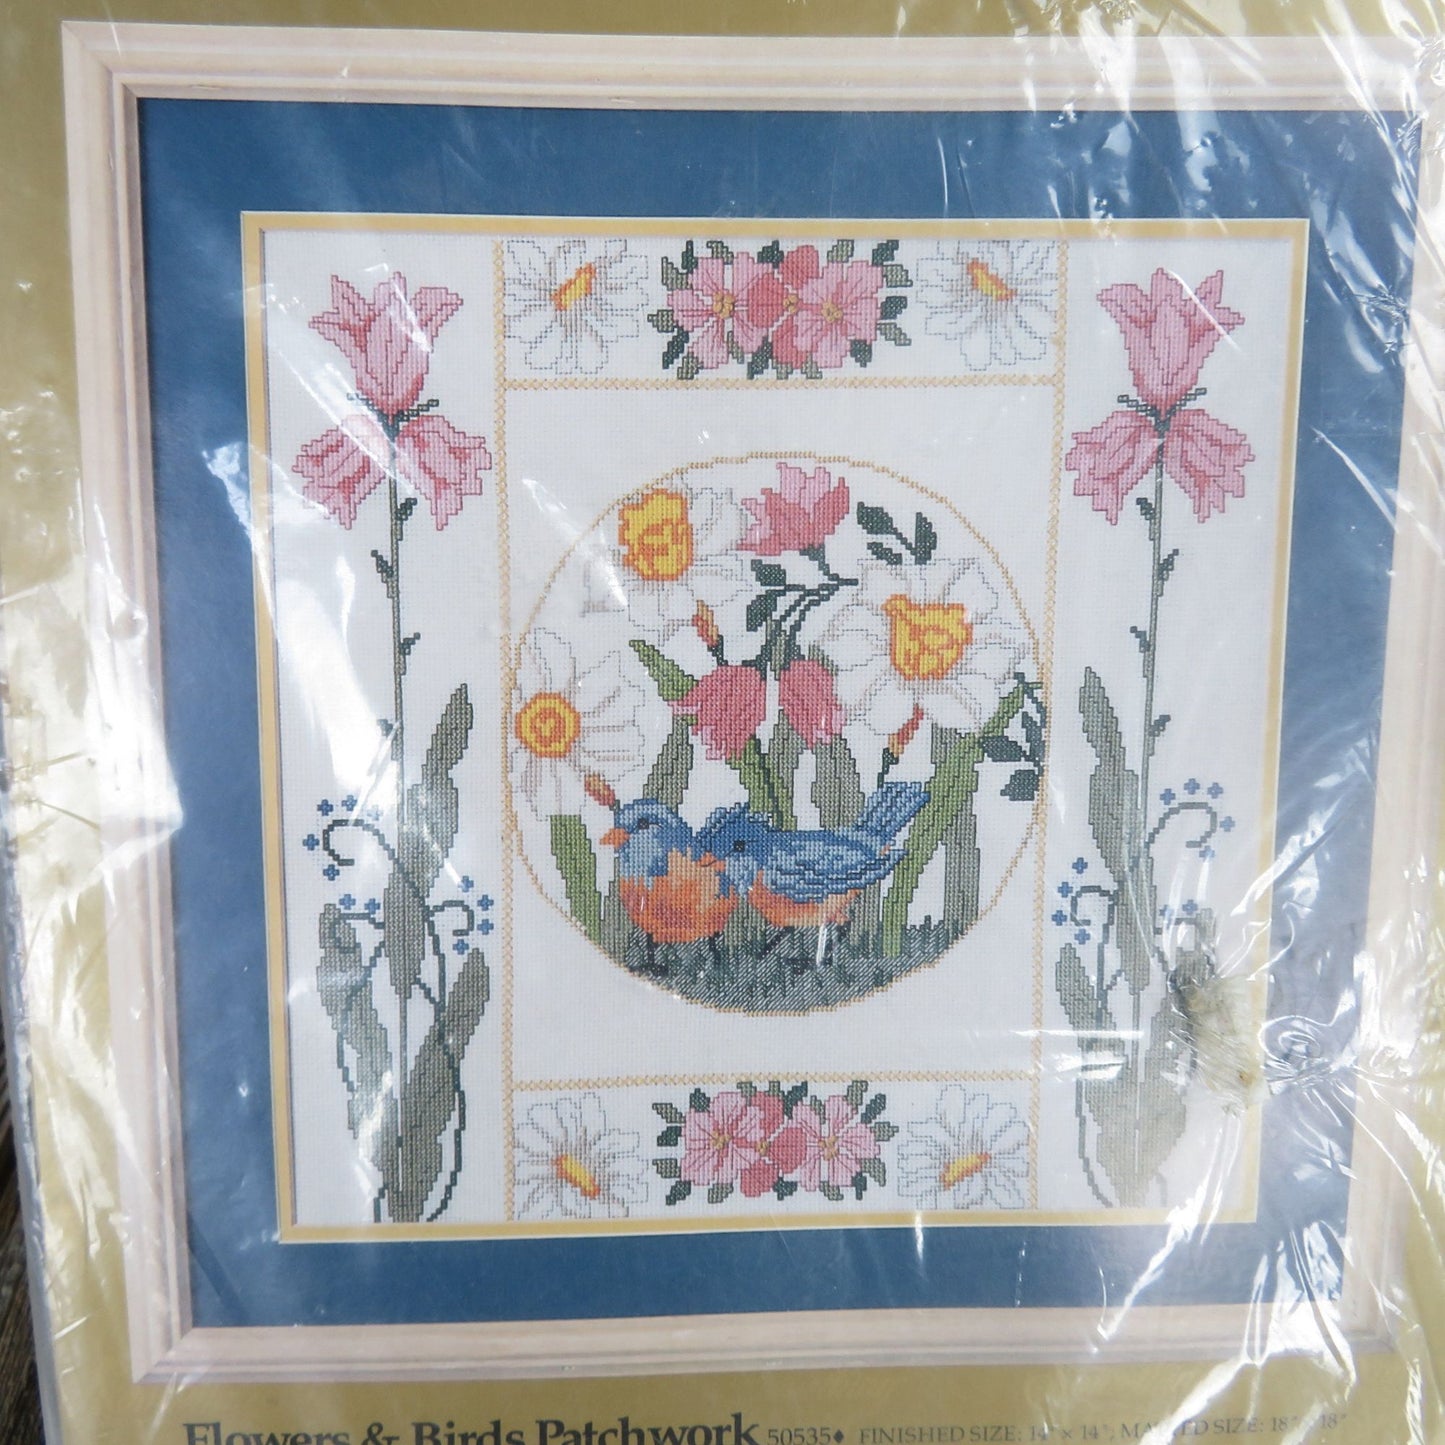 Flowers and Birds Patchwork Counted Cross Stitch Kit Candamar Designs Something Special 50535